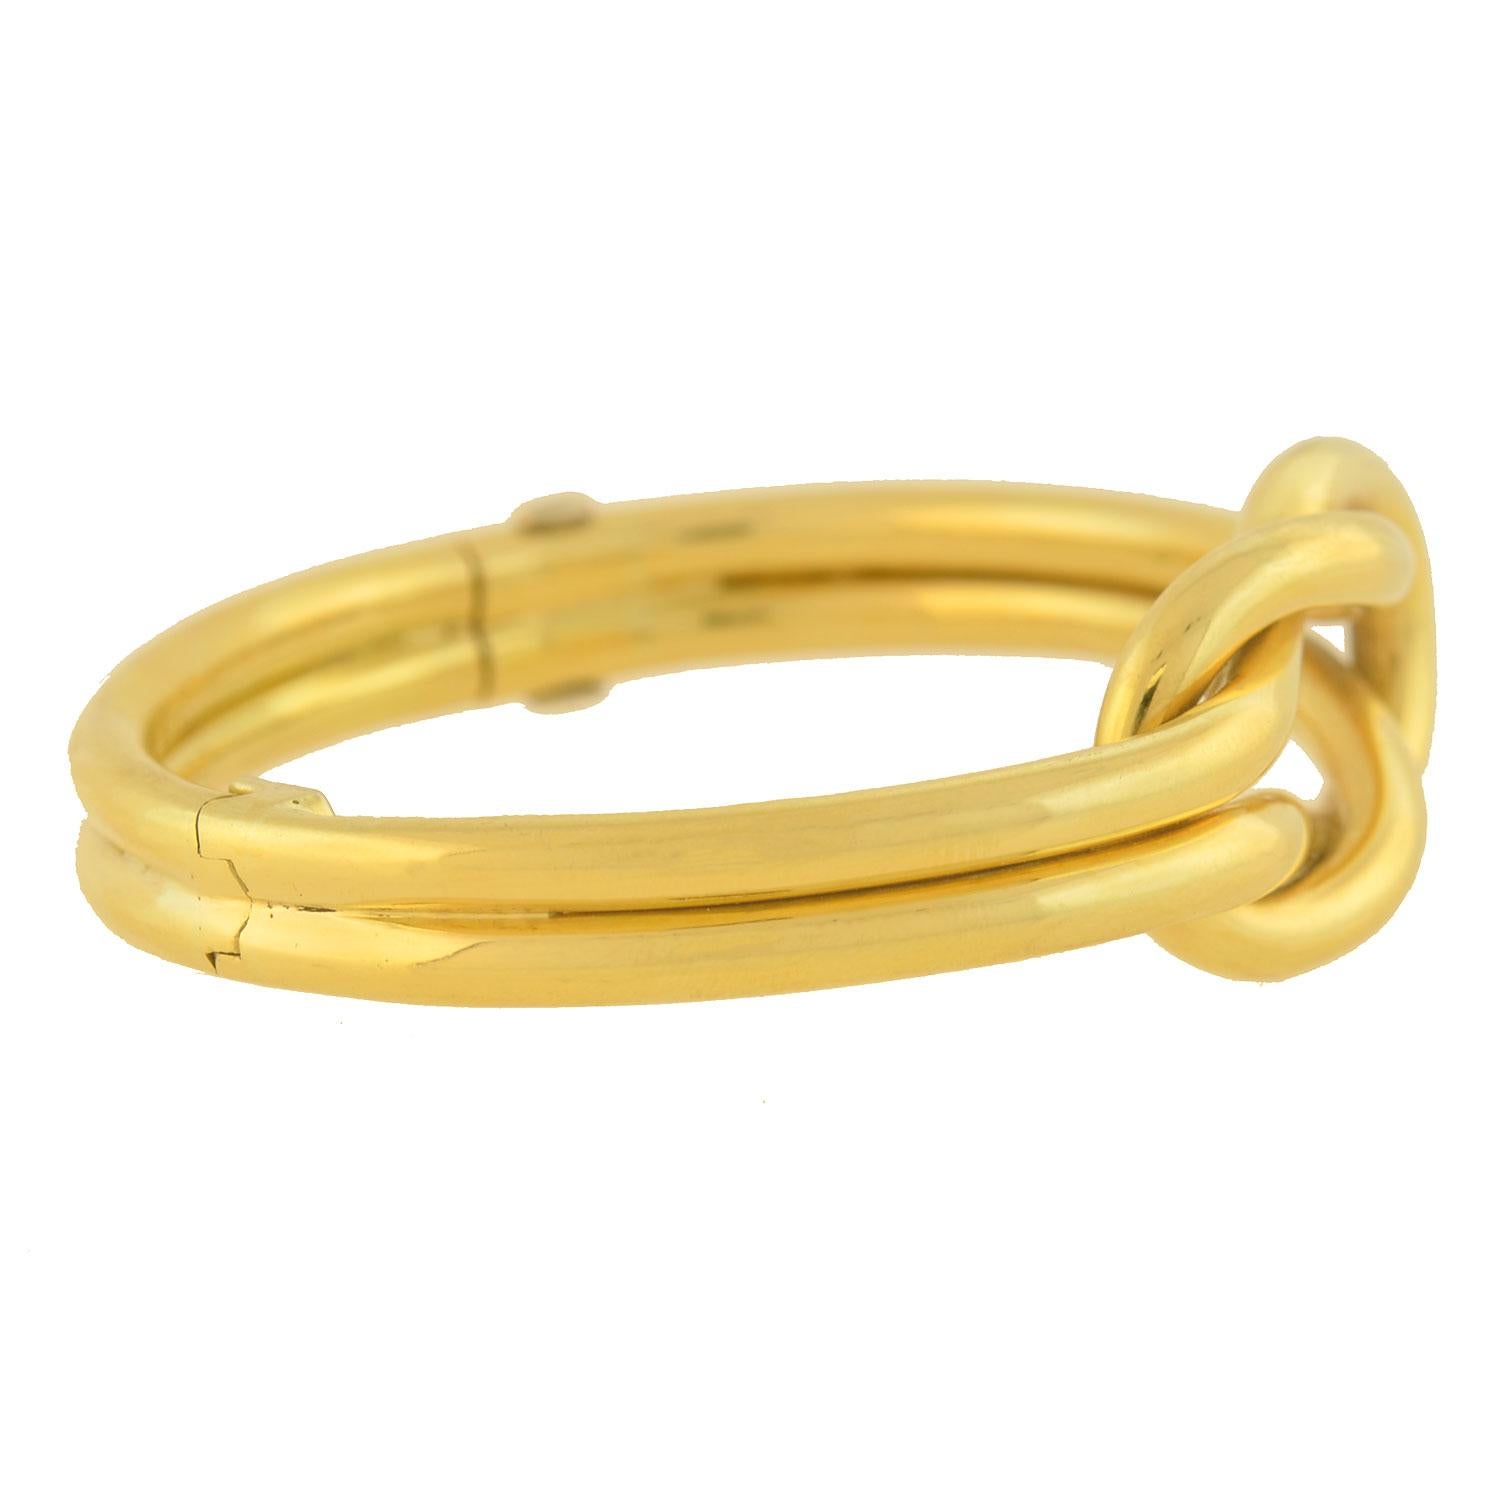 Women's Contemporary Yellow Gold Love Knot Hinged Bangle Bracelet